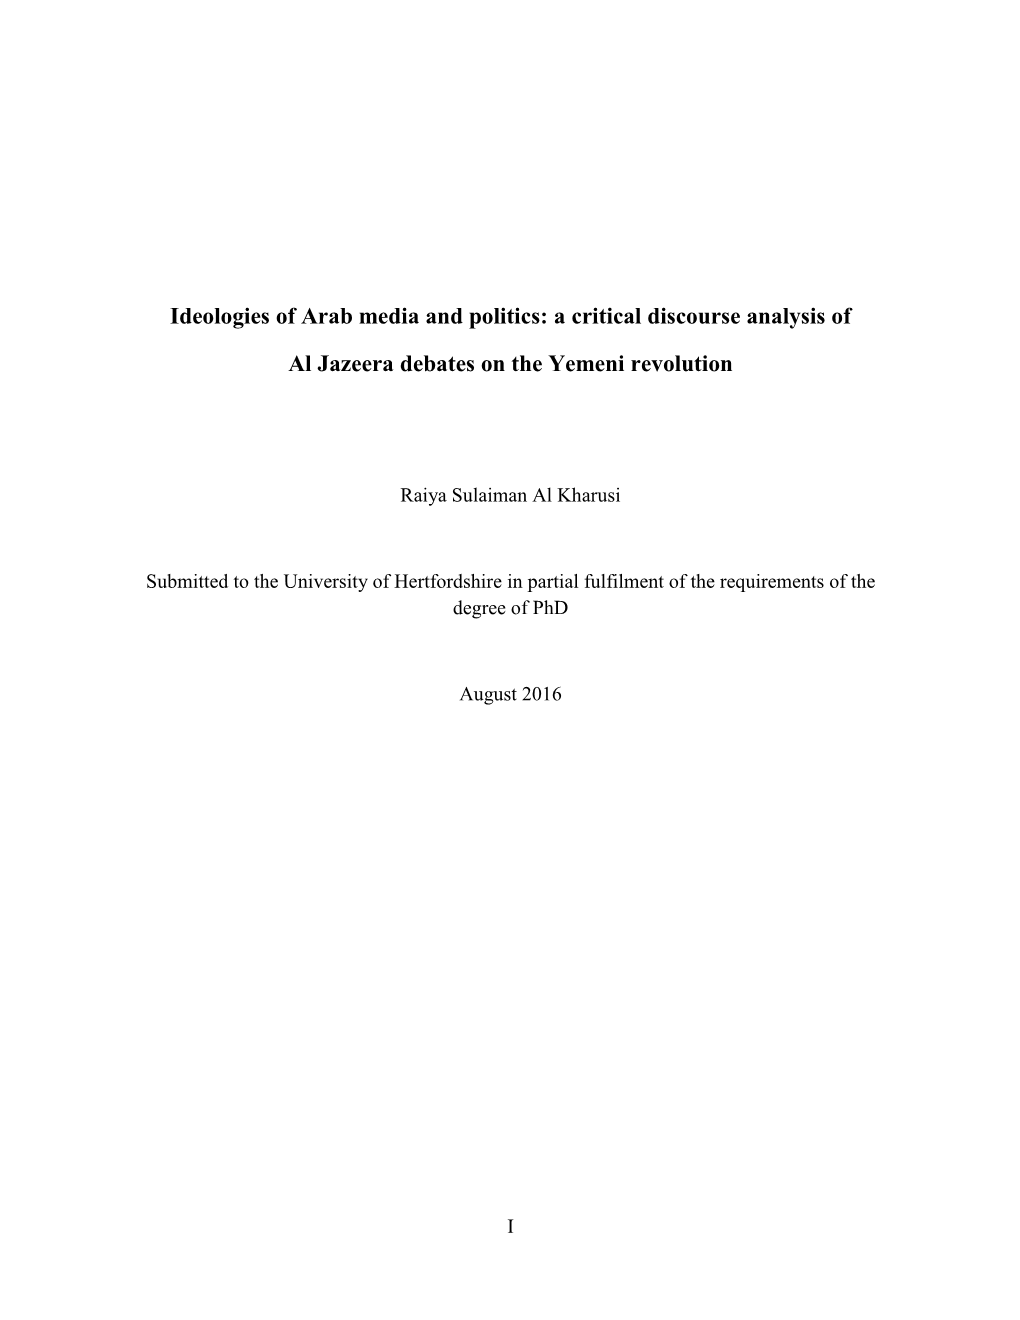 Ideologies of Arab Media and Politics: a Critical Discourse Analysis of Al